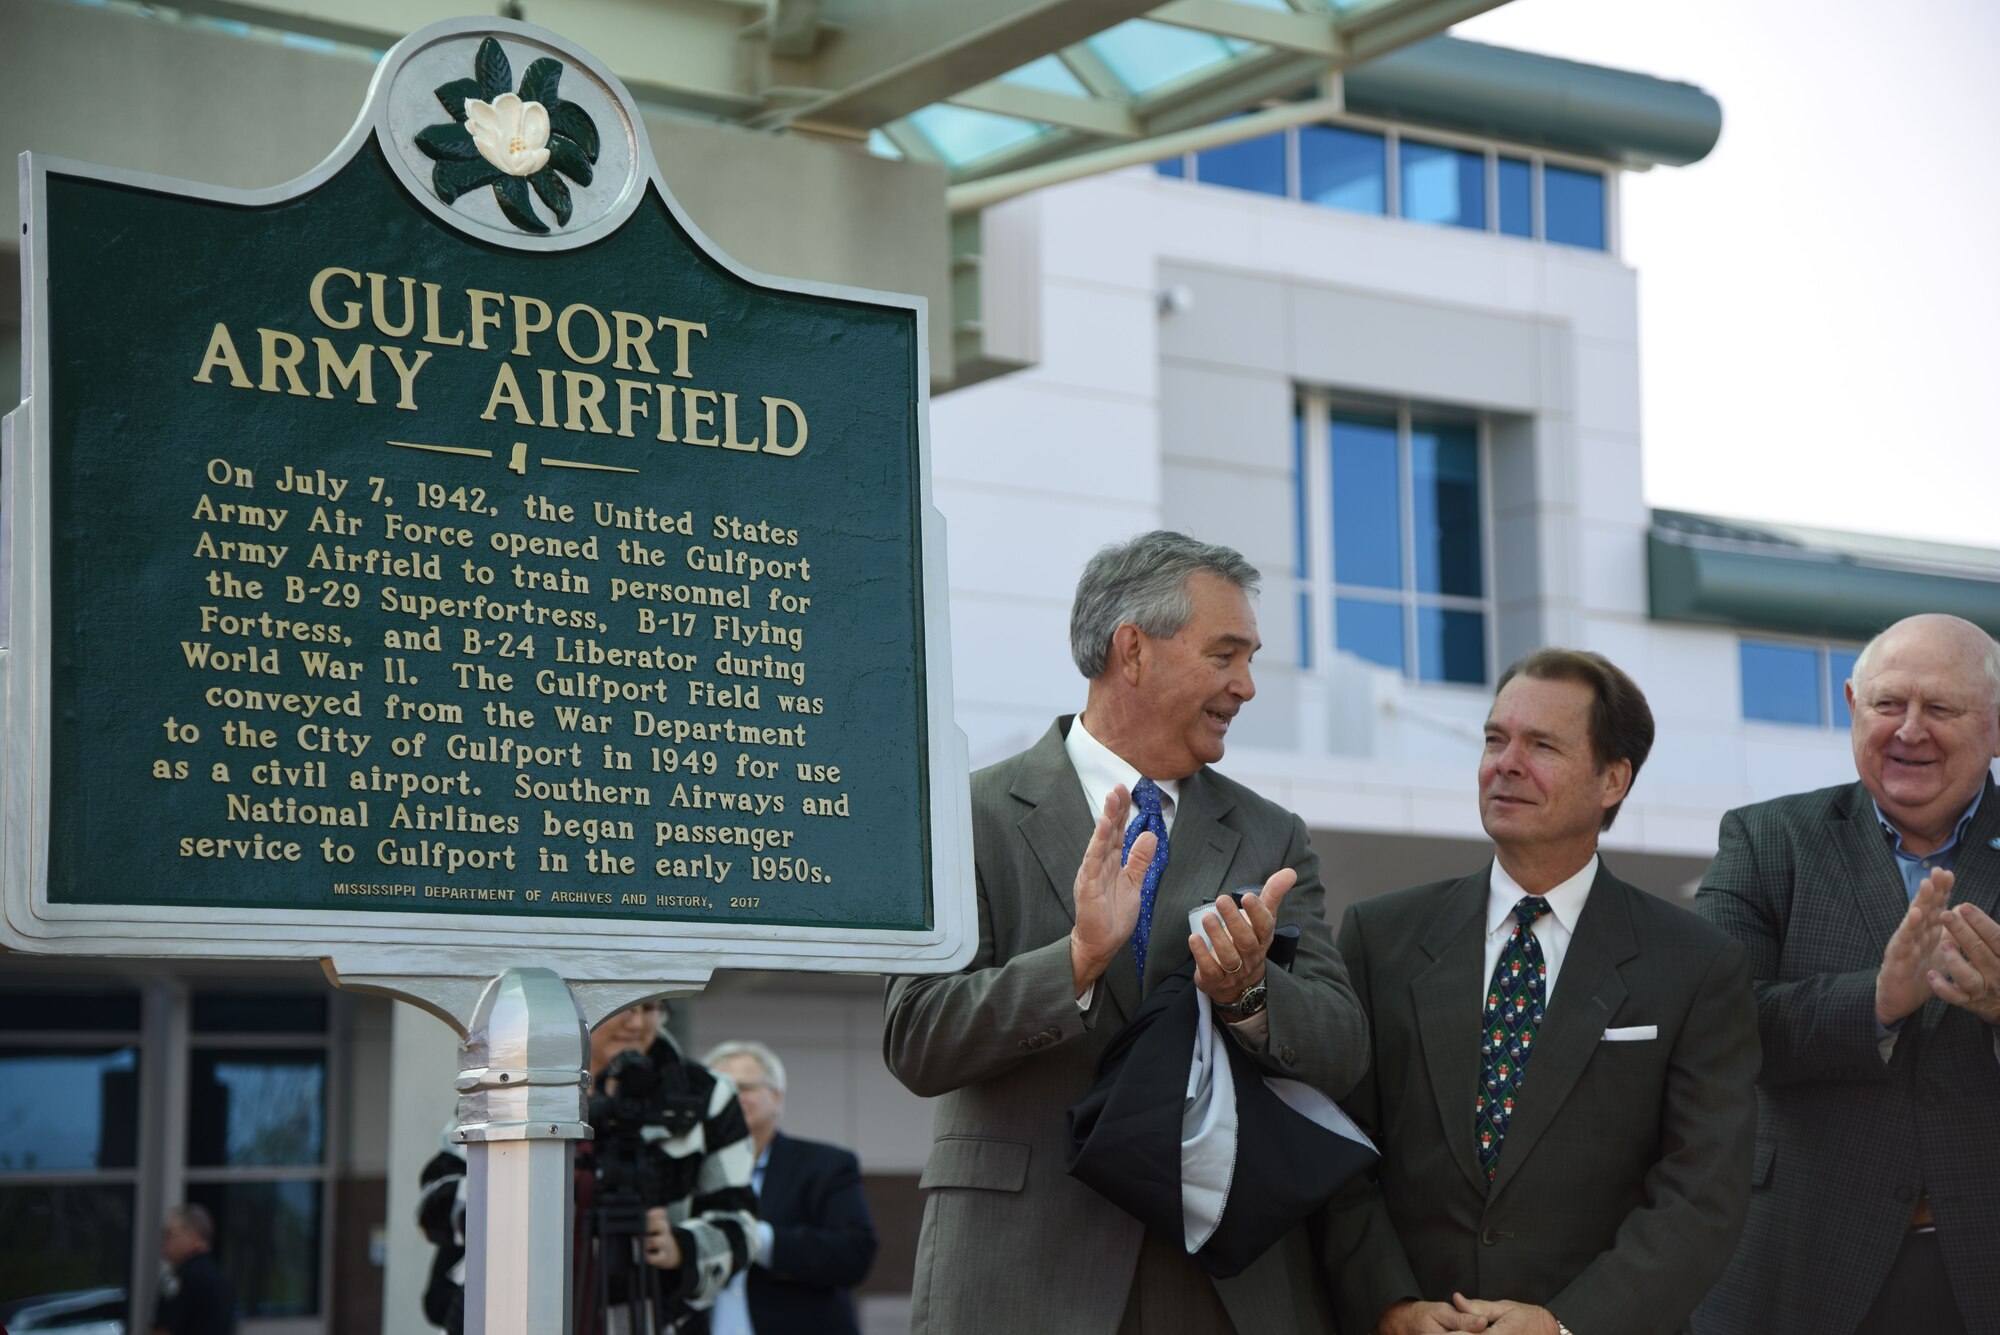 Local dignitaries unveil a historical marker at the entrance of the airport during the Gulfport-Biloxi International Airport 75 Year Commemoration Dec. 13, in Gulfport, Mississippi. The marker was emplaced to honor the airport’s ties to the military dating back to 1942. The U.S. Air Force Band of the West, Nightwatch, also performed during the event. (U.S. Air Force photo by Kemberly Groue)